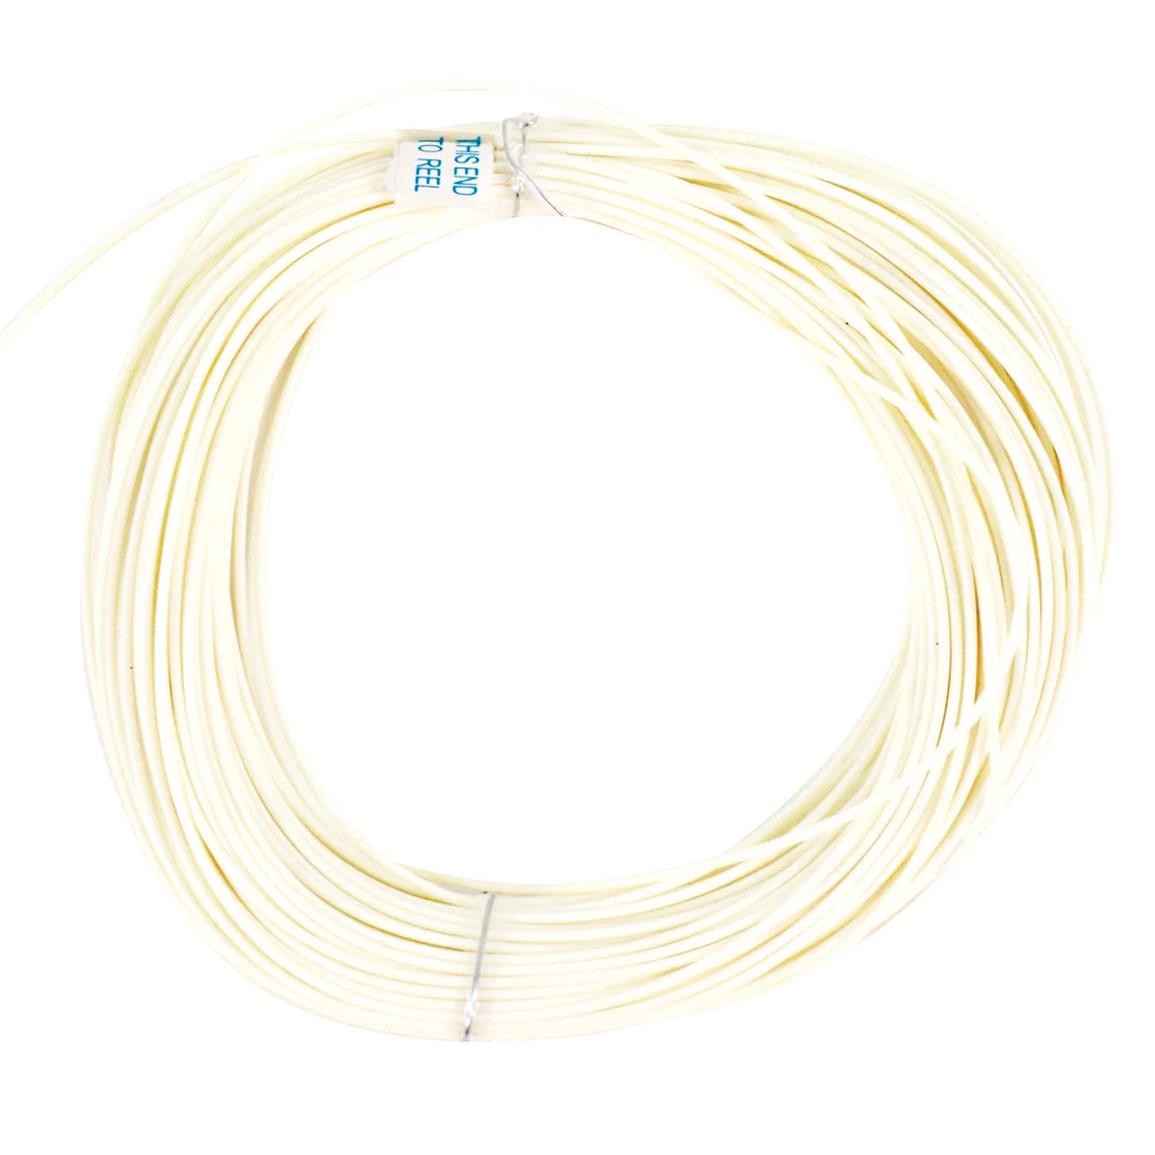 Clam Rattle Reel Ice Fishing Line, Glow White